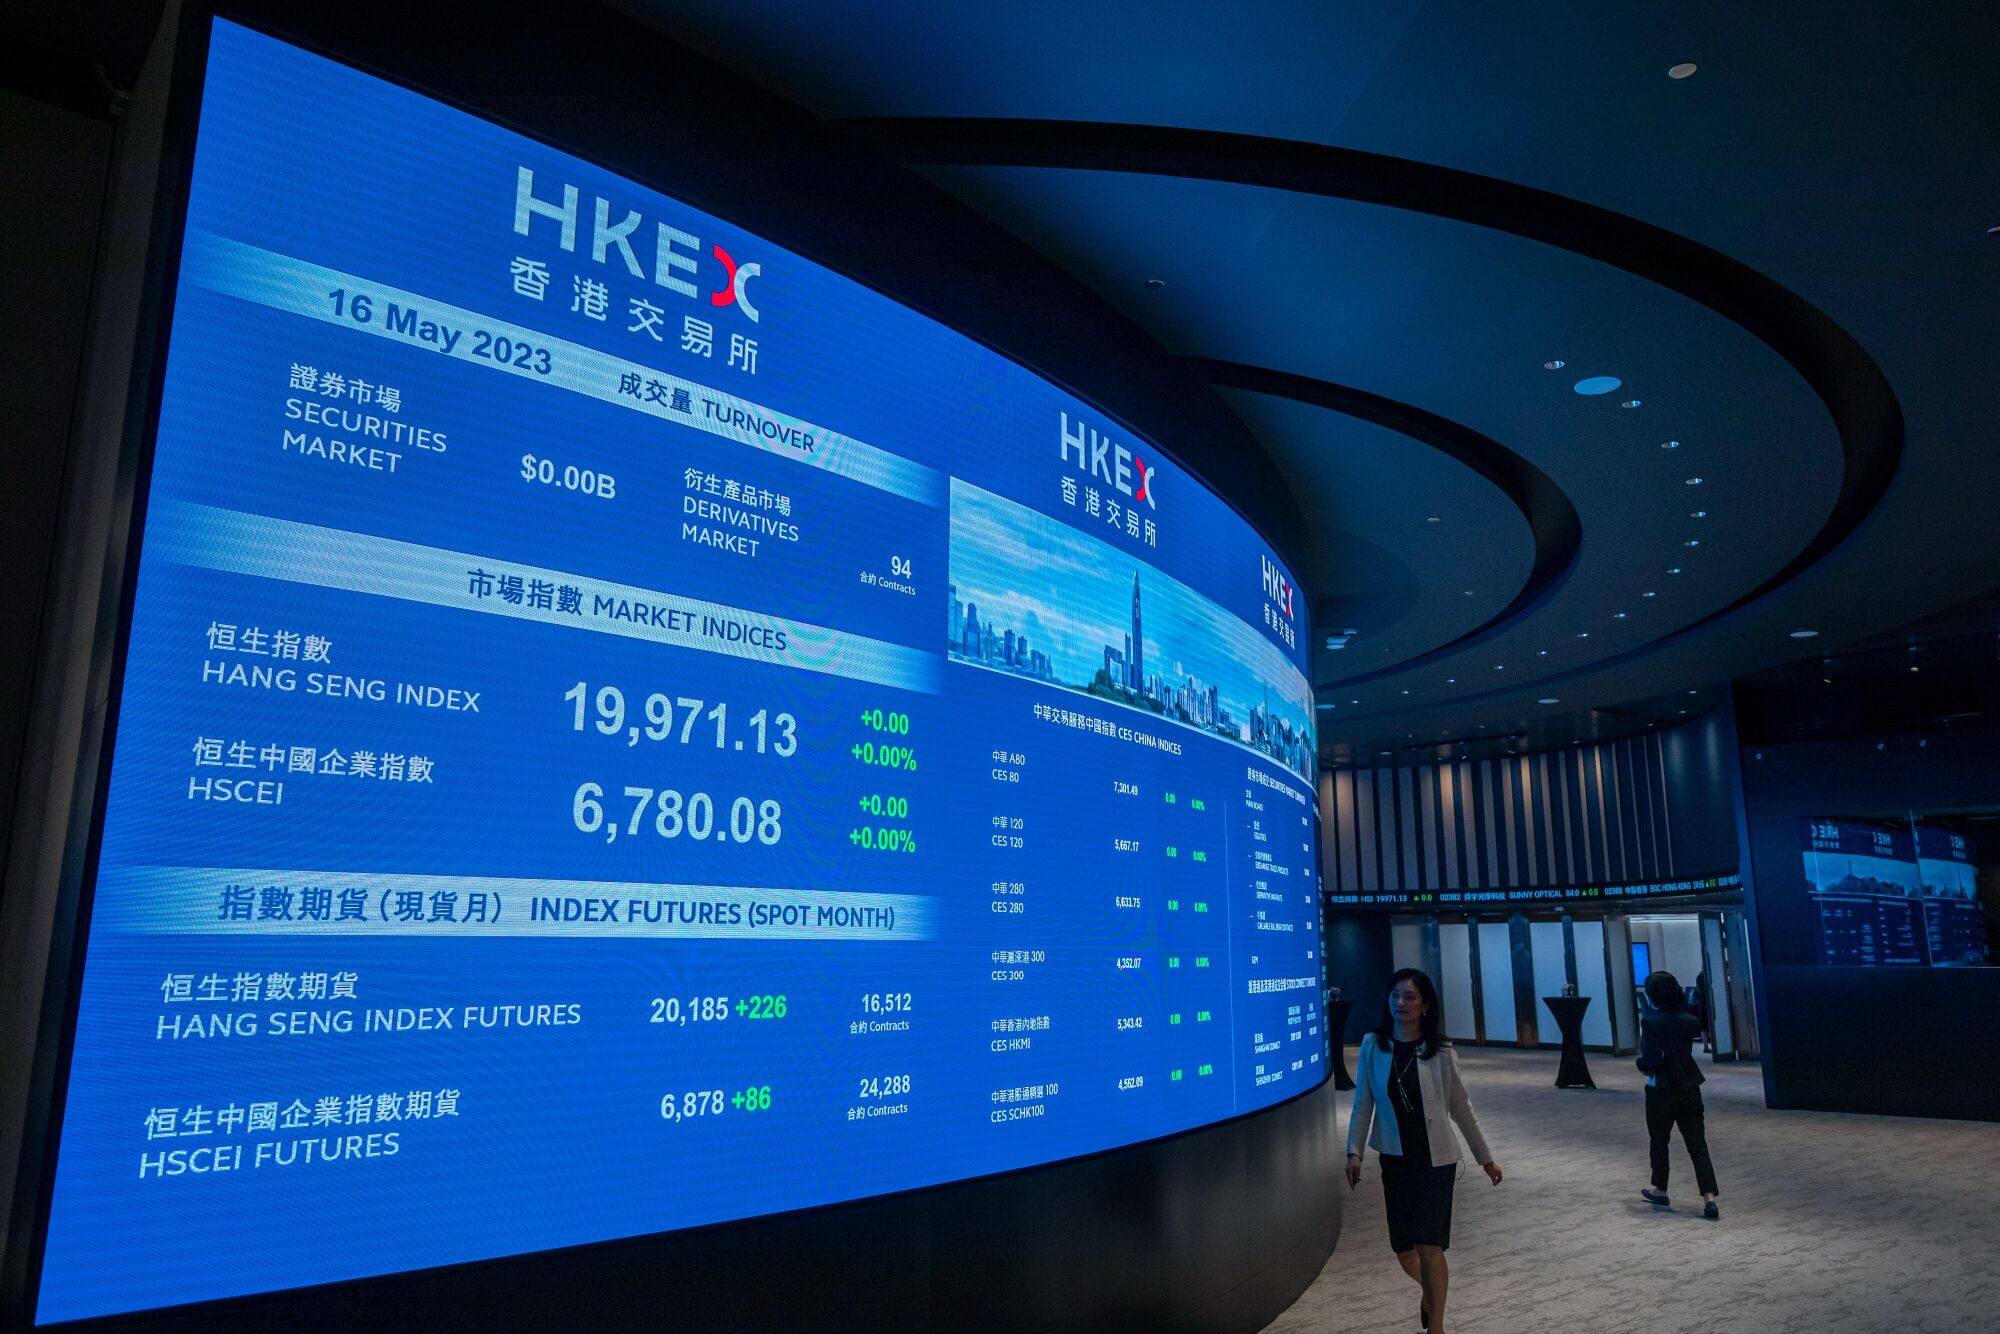 A screen showing various index figures during the London Metal Exchange (LME) Asia Metals seminar at the Hong Kong Connect Hall in Hong Kong, China, on Tuesday, May 16, 2023. Photo: Bloomberg